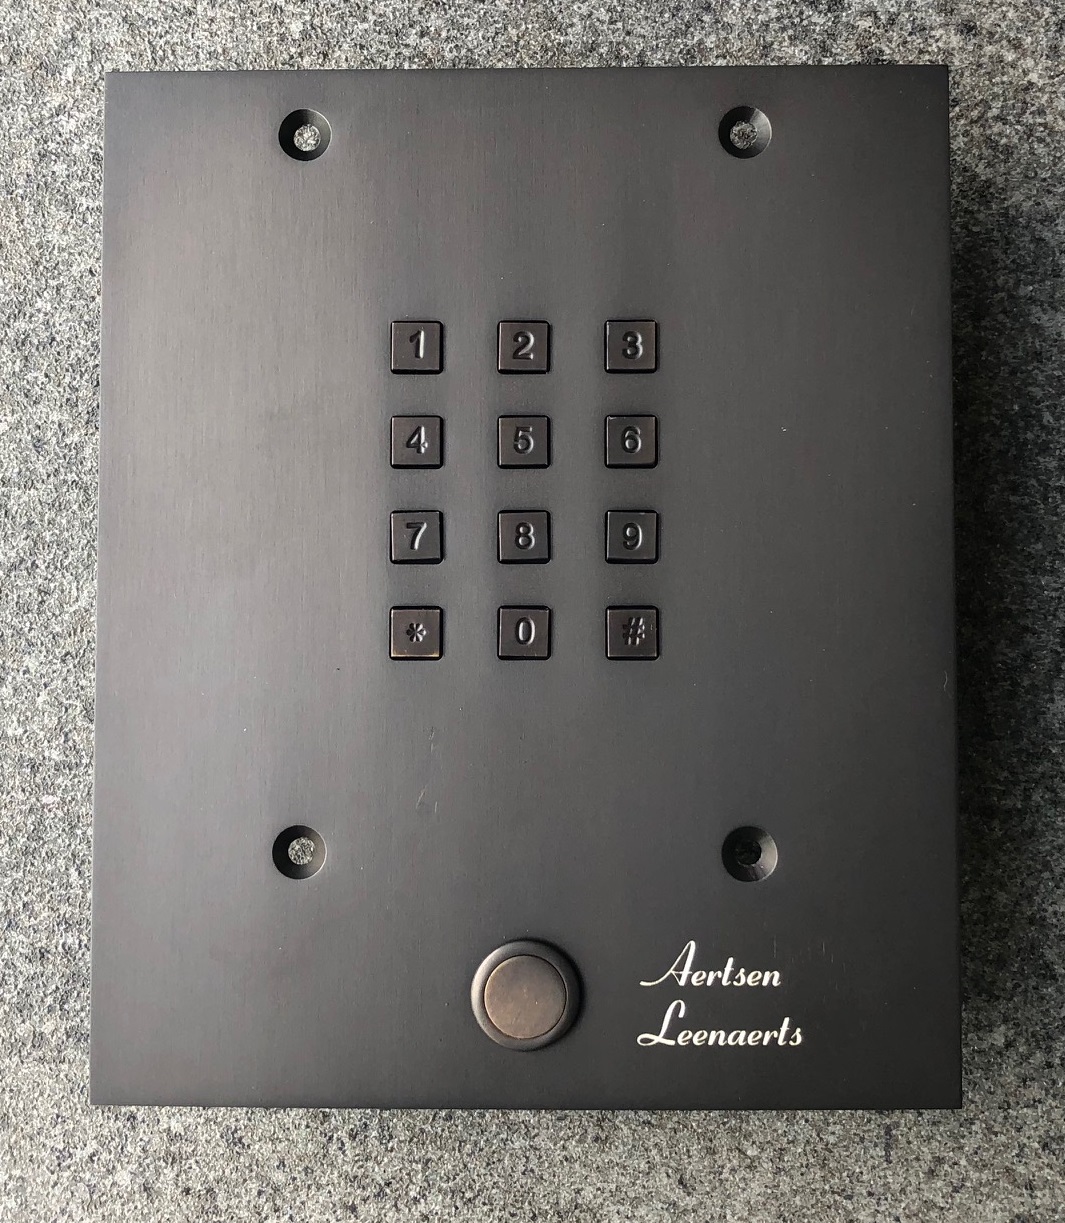 Wizard Bronze mat keypad 1 push button stand-alone and wiegand